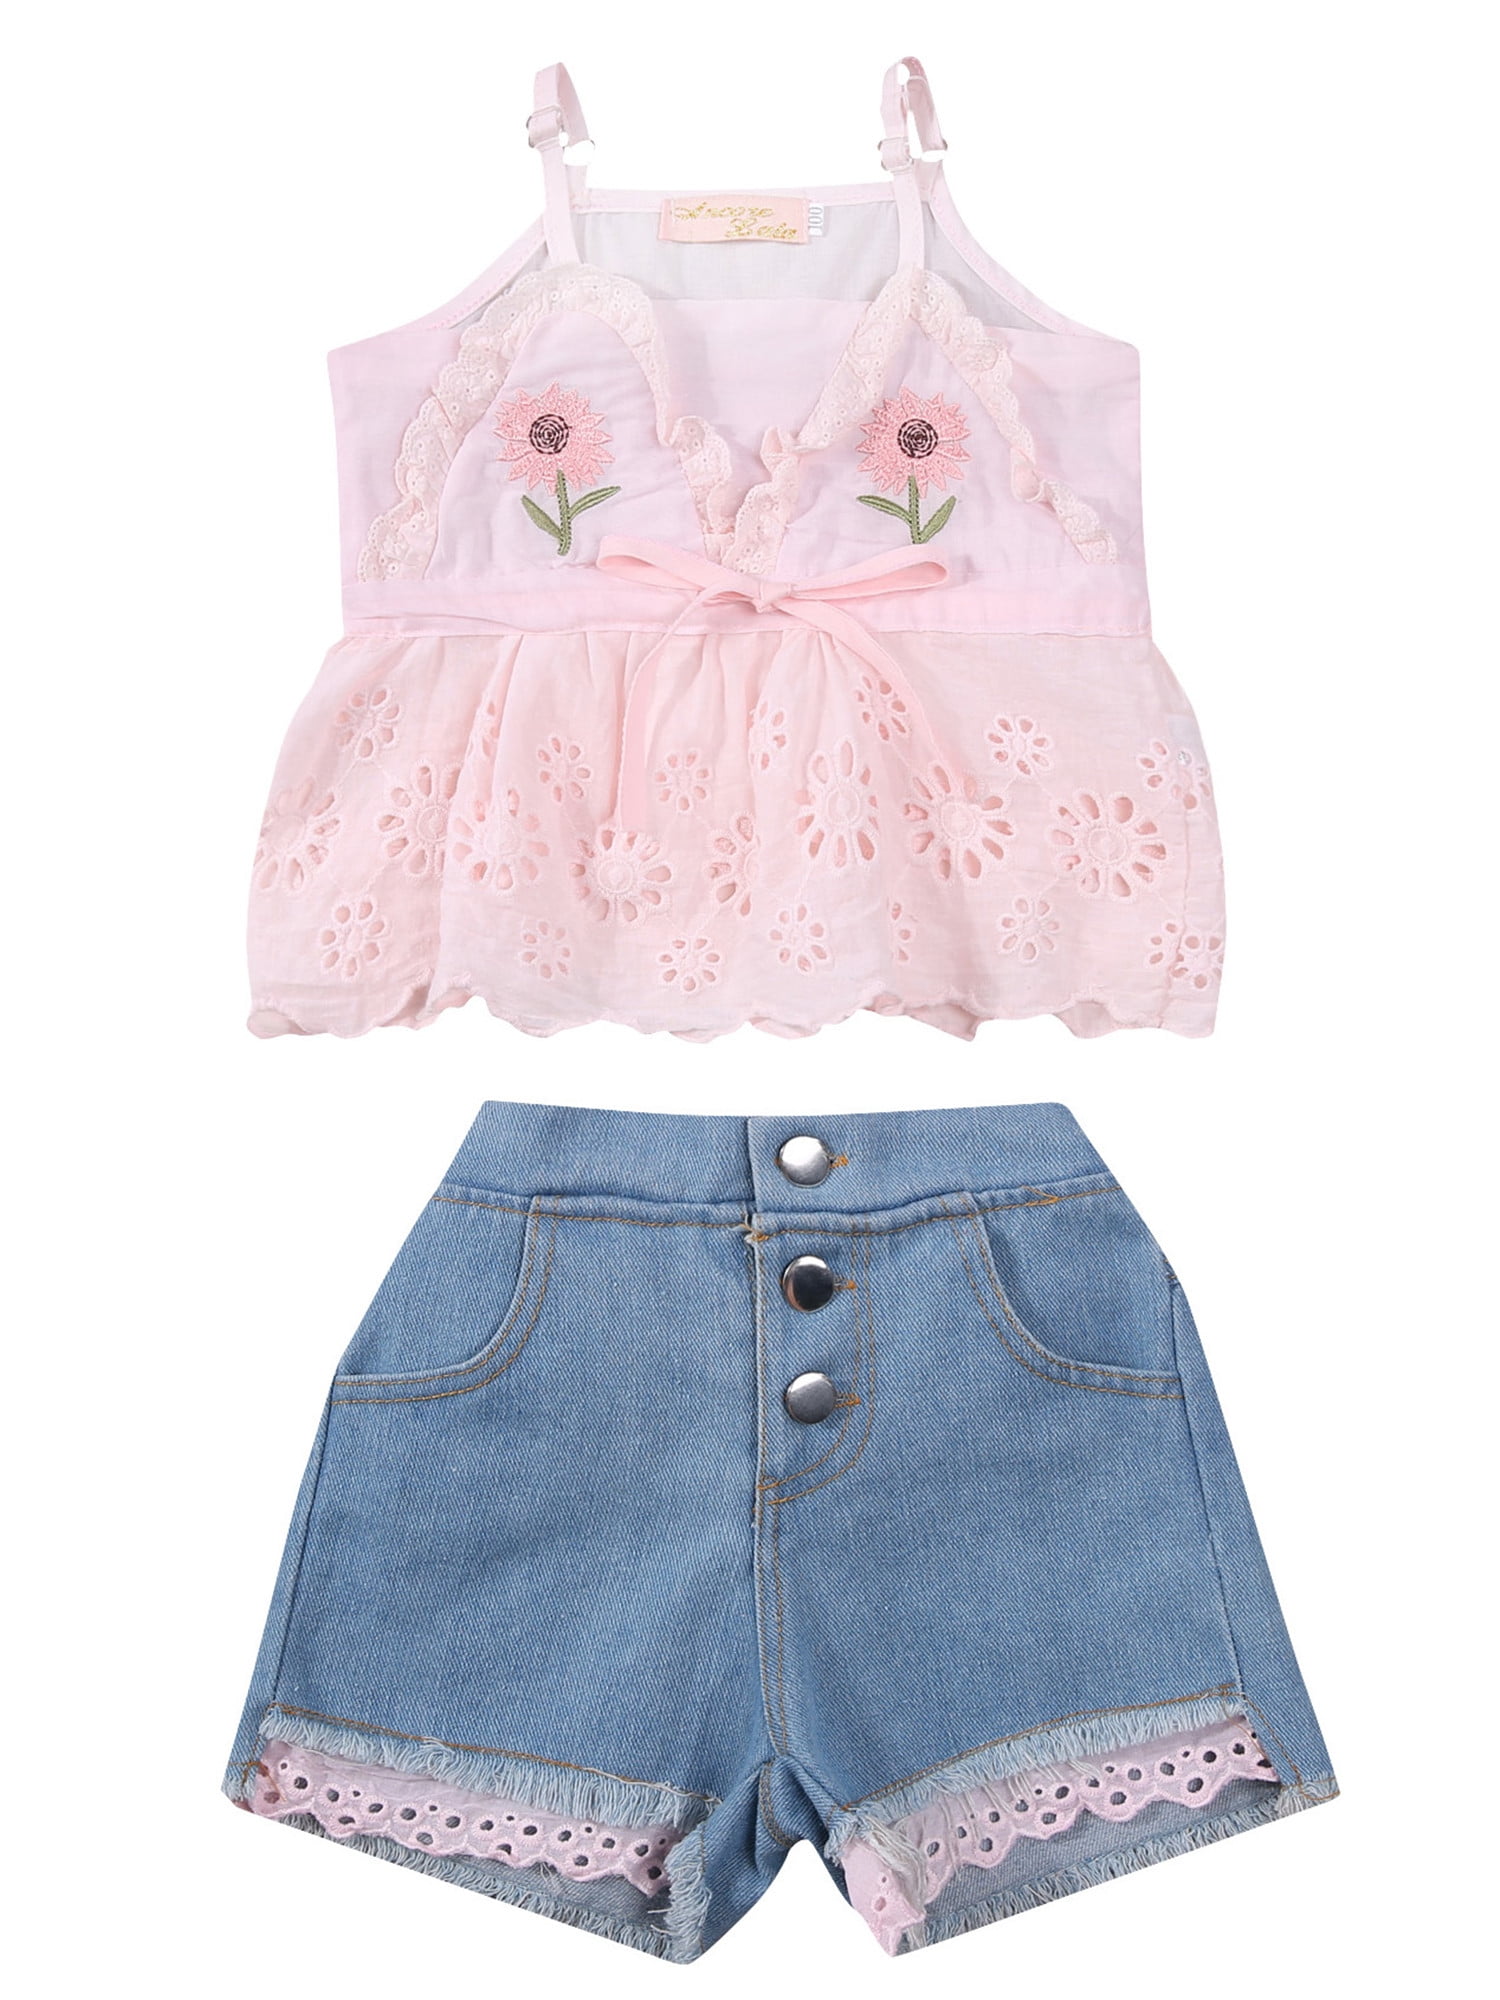 Details about   Toddler Girl Outfits 2Pcs Ruffle T-Shirt Vest Tops and Shorts Pants Clothes Sets 